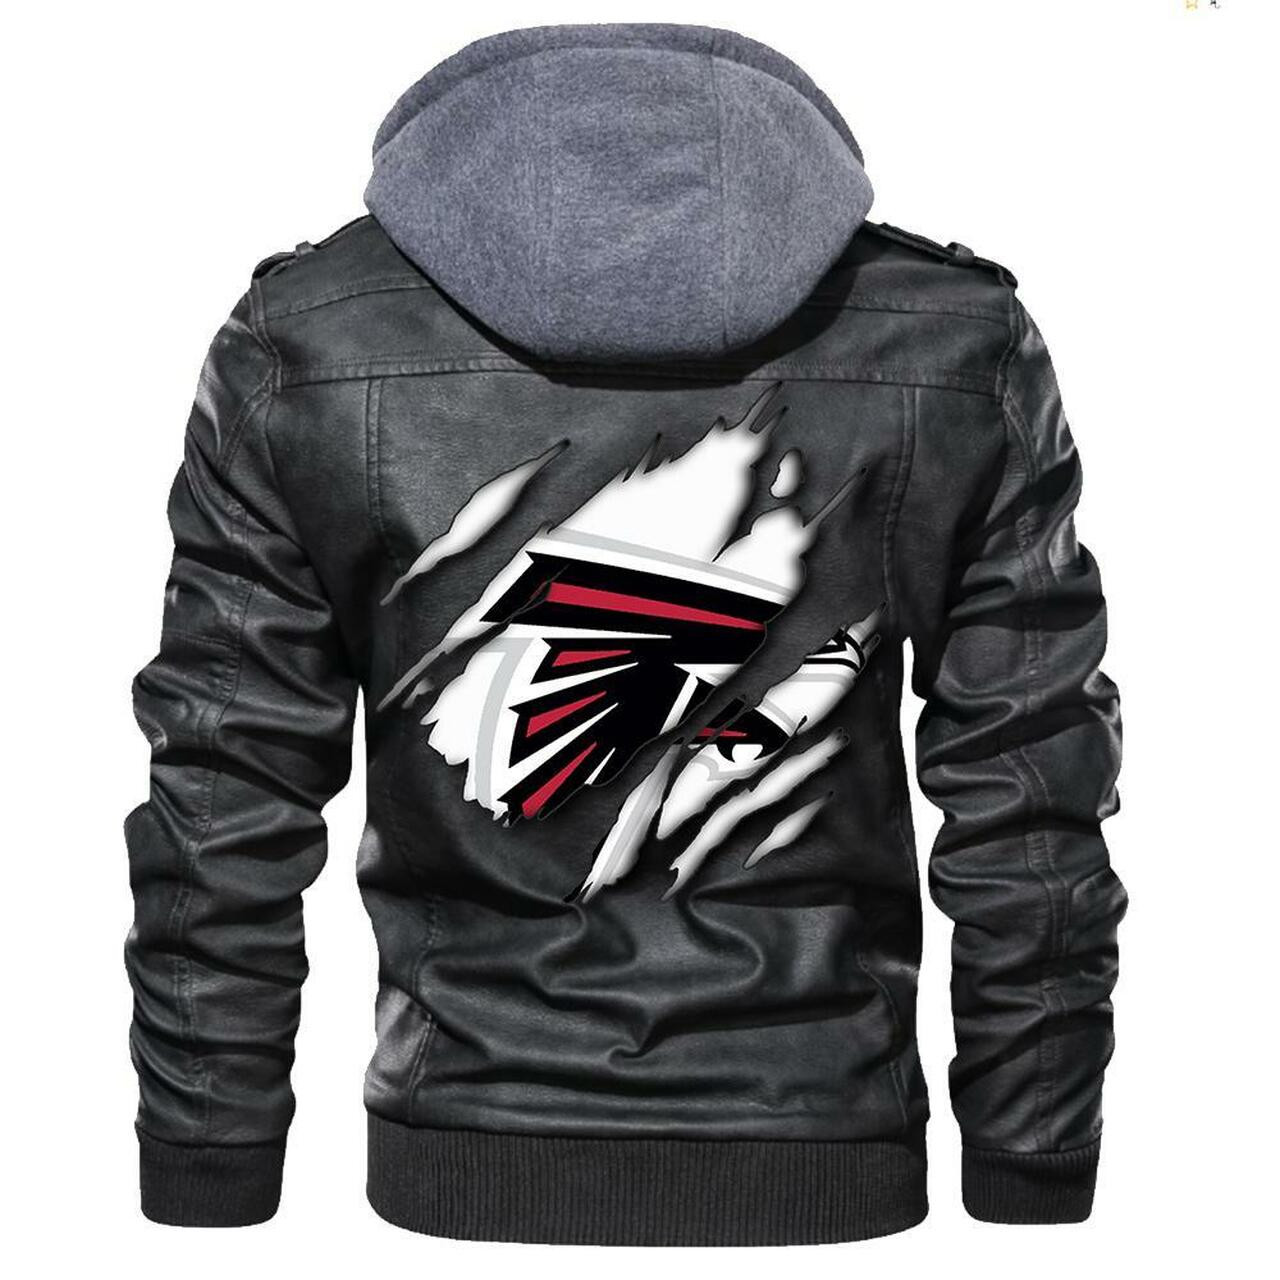 Top 200+ leather jacket so cool for your man 97